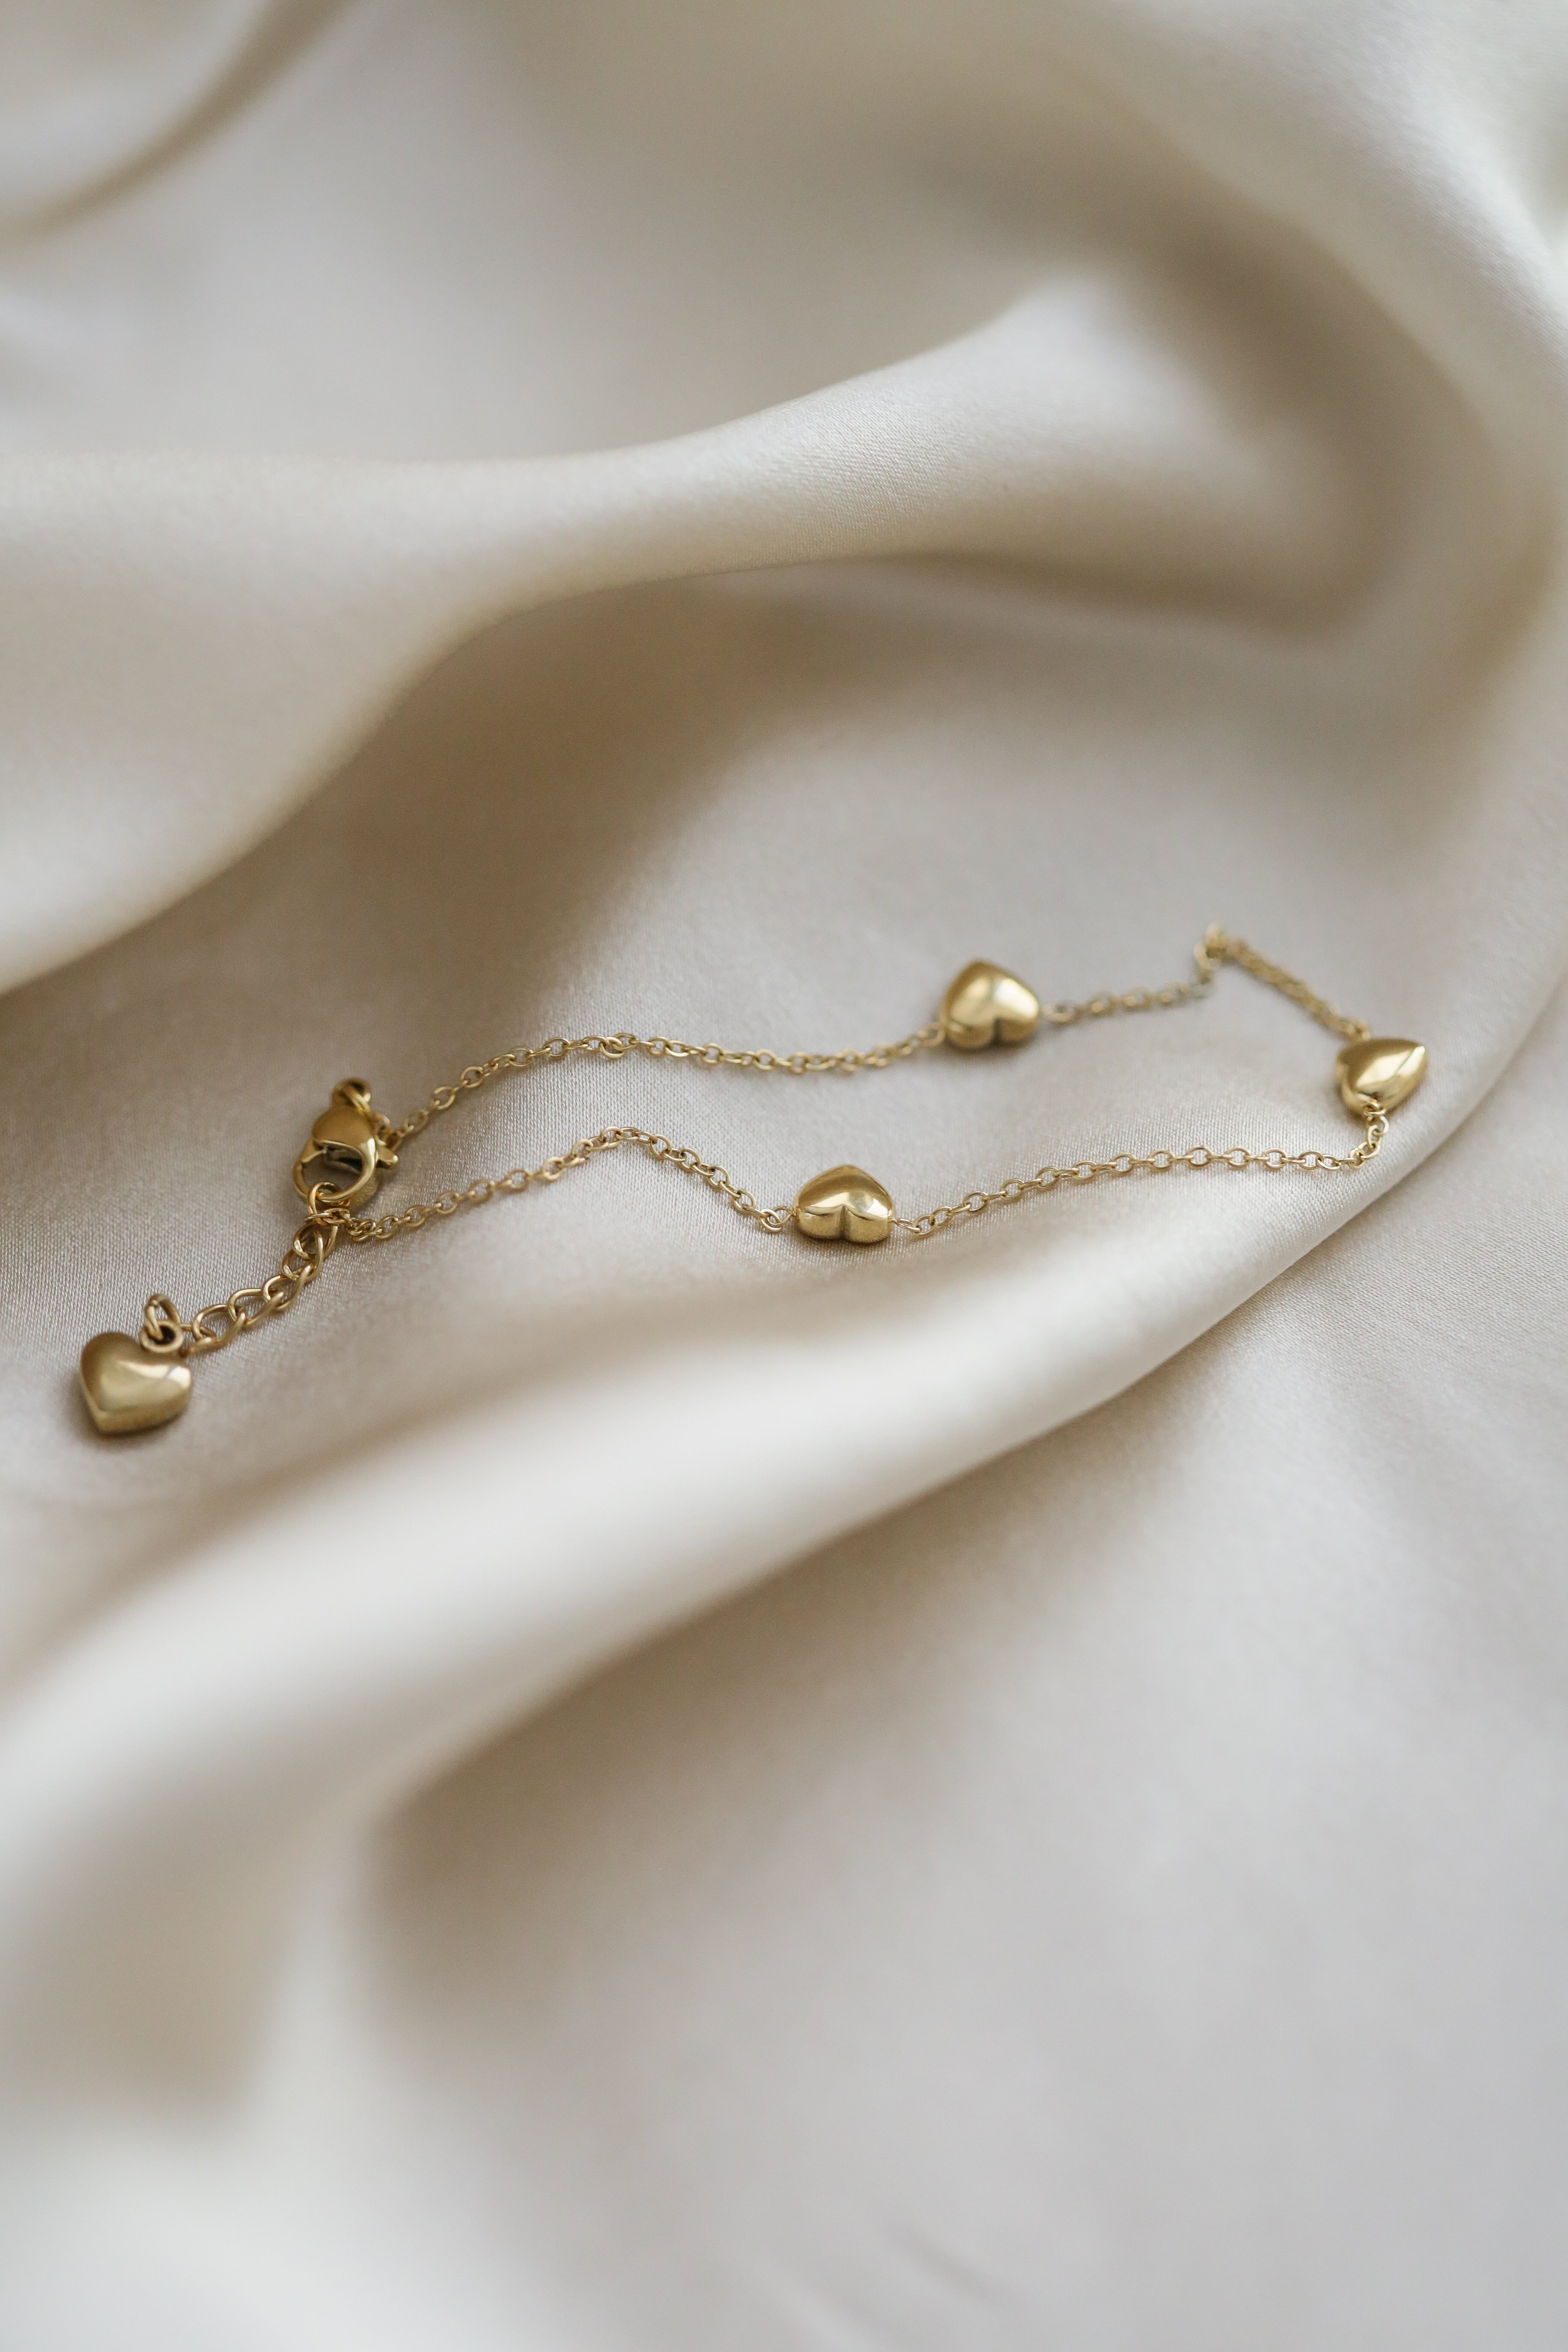 The Heart - Trio Bracelet - Boutique Minimaliste has waterproof, durable, elegant and vintage inspired jewelry